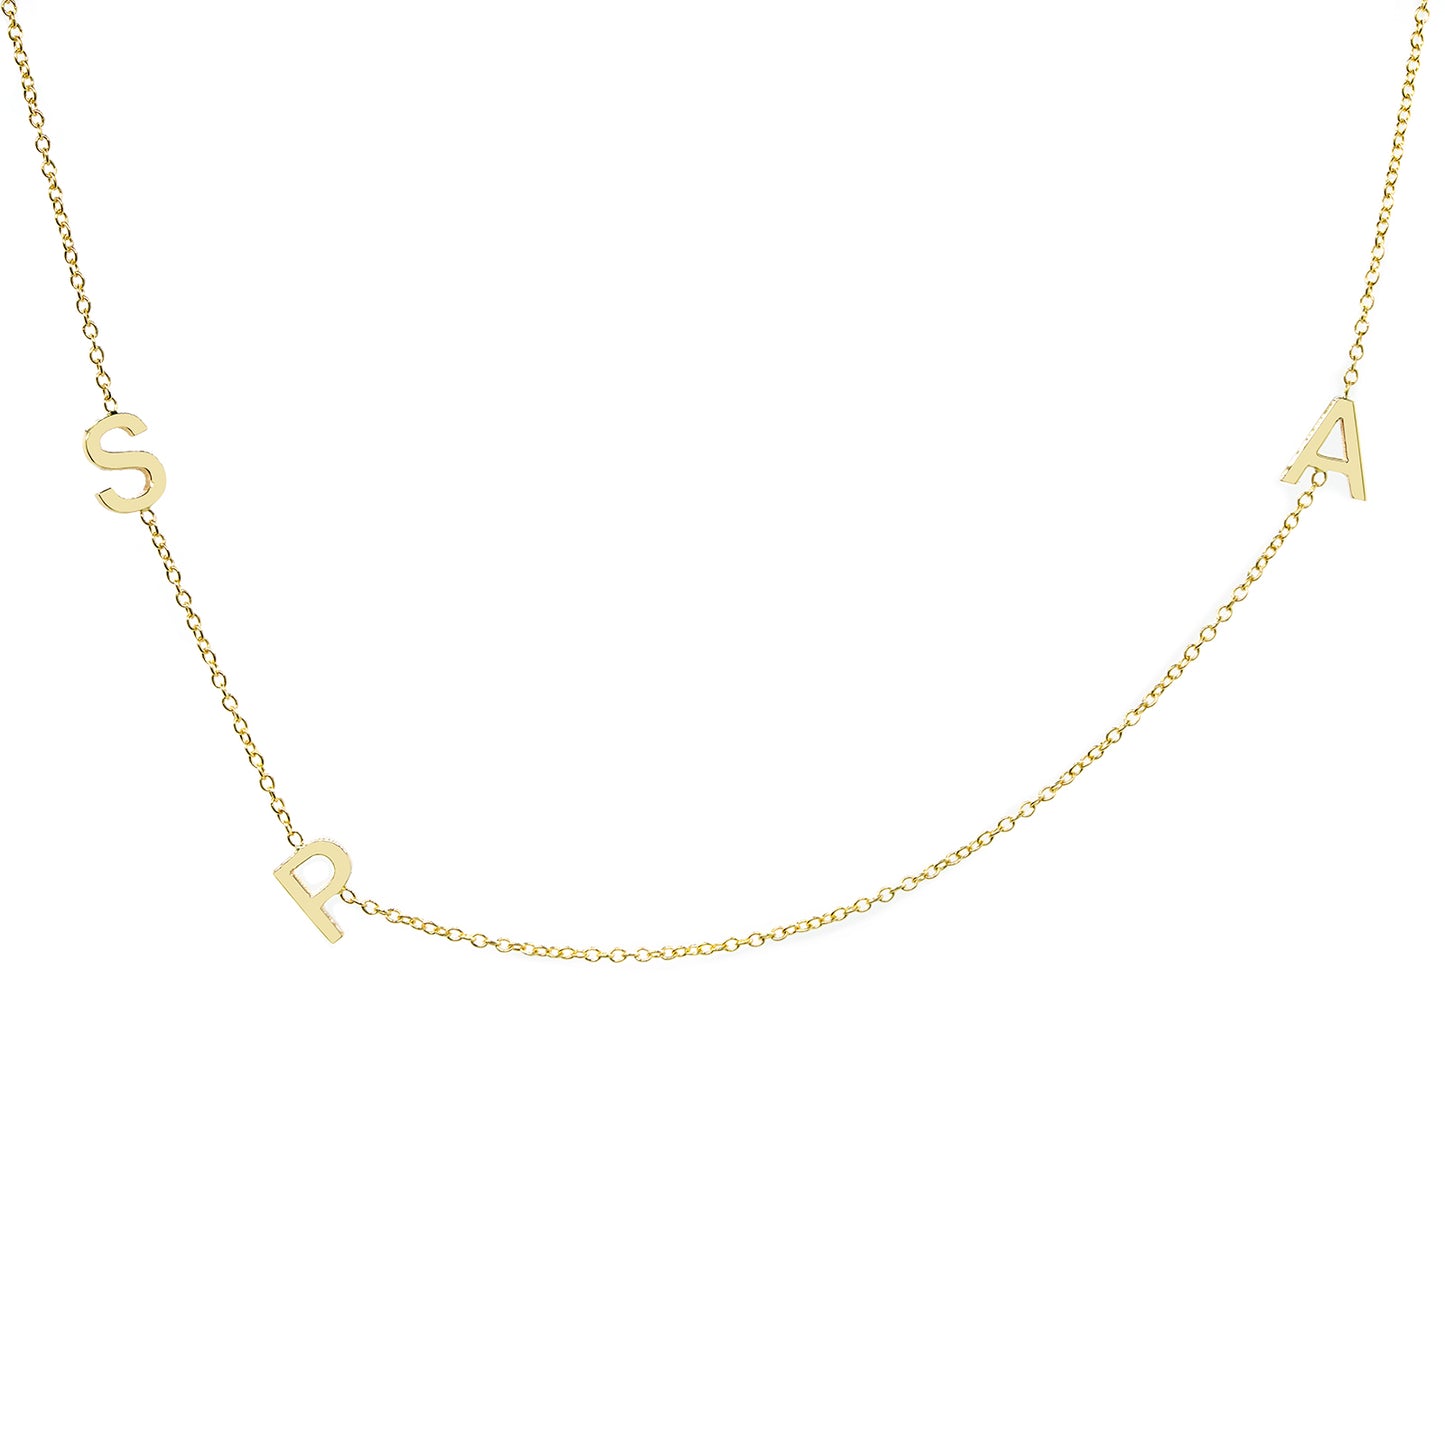 3 Initials Offset Letters Necklace in High Polished 14K Gold